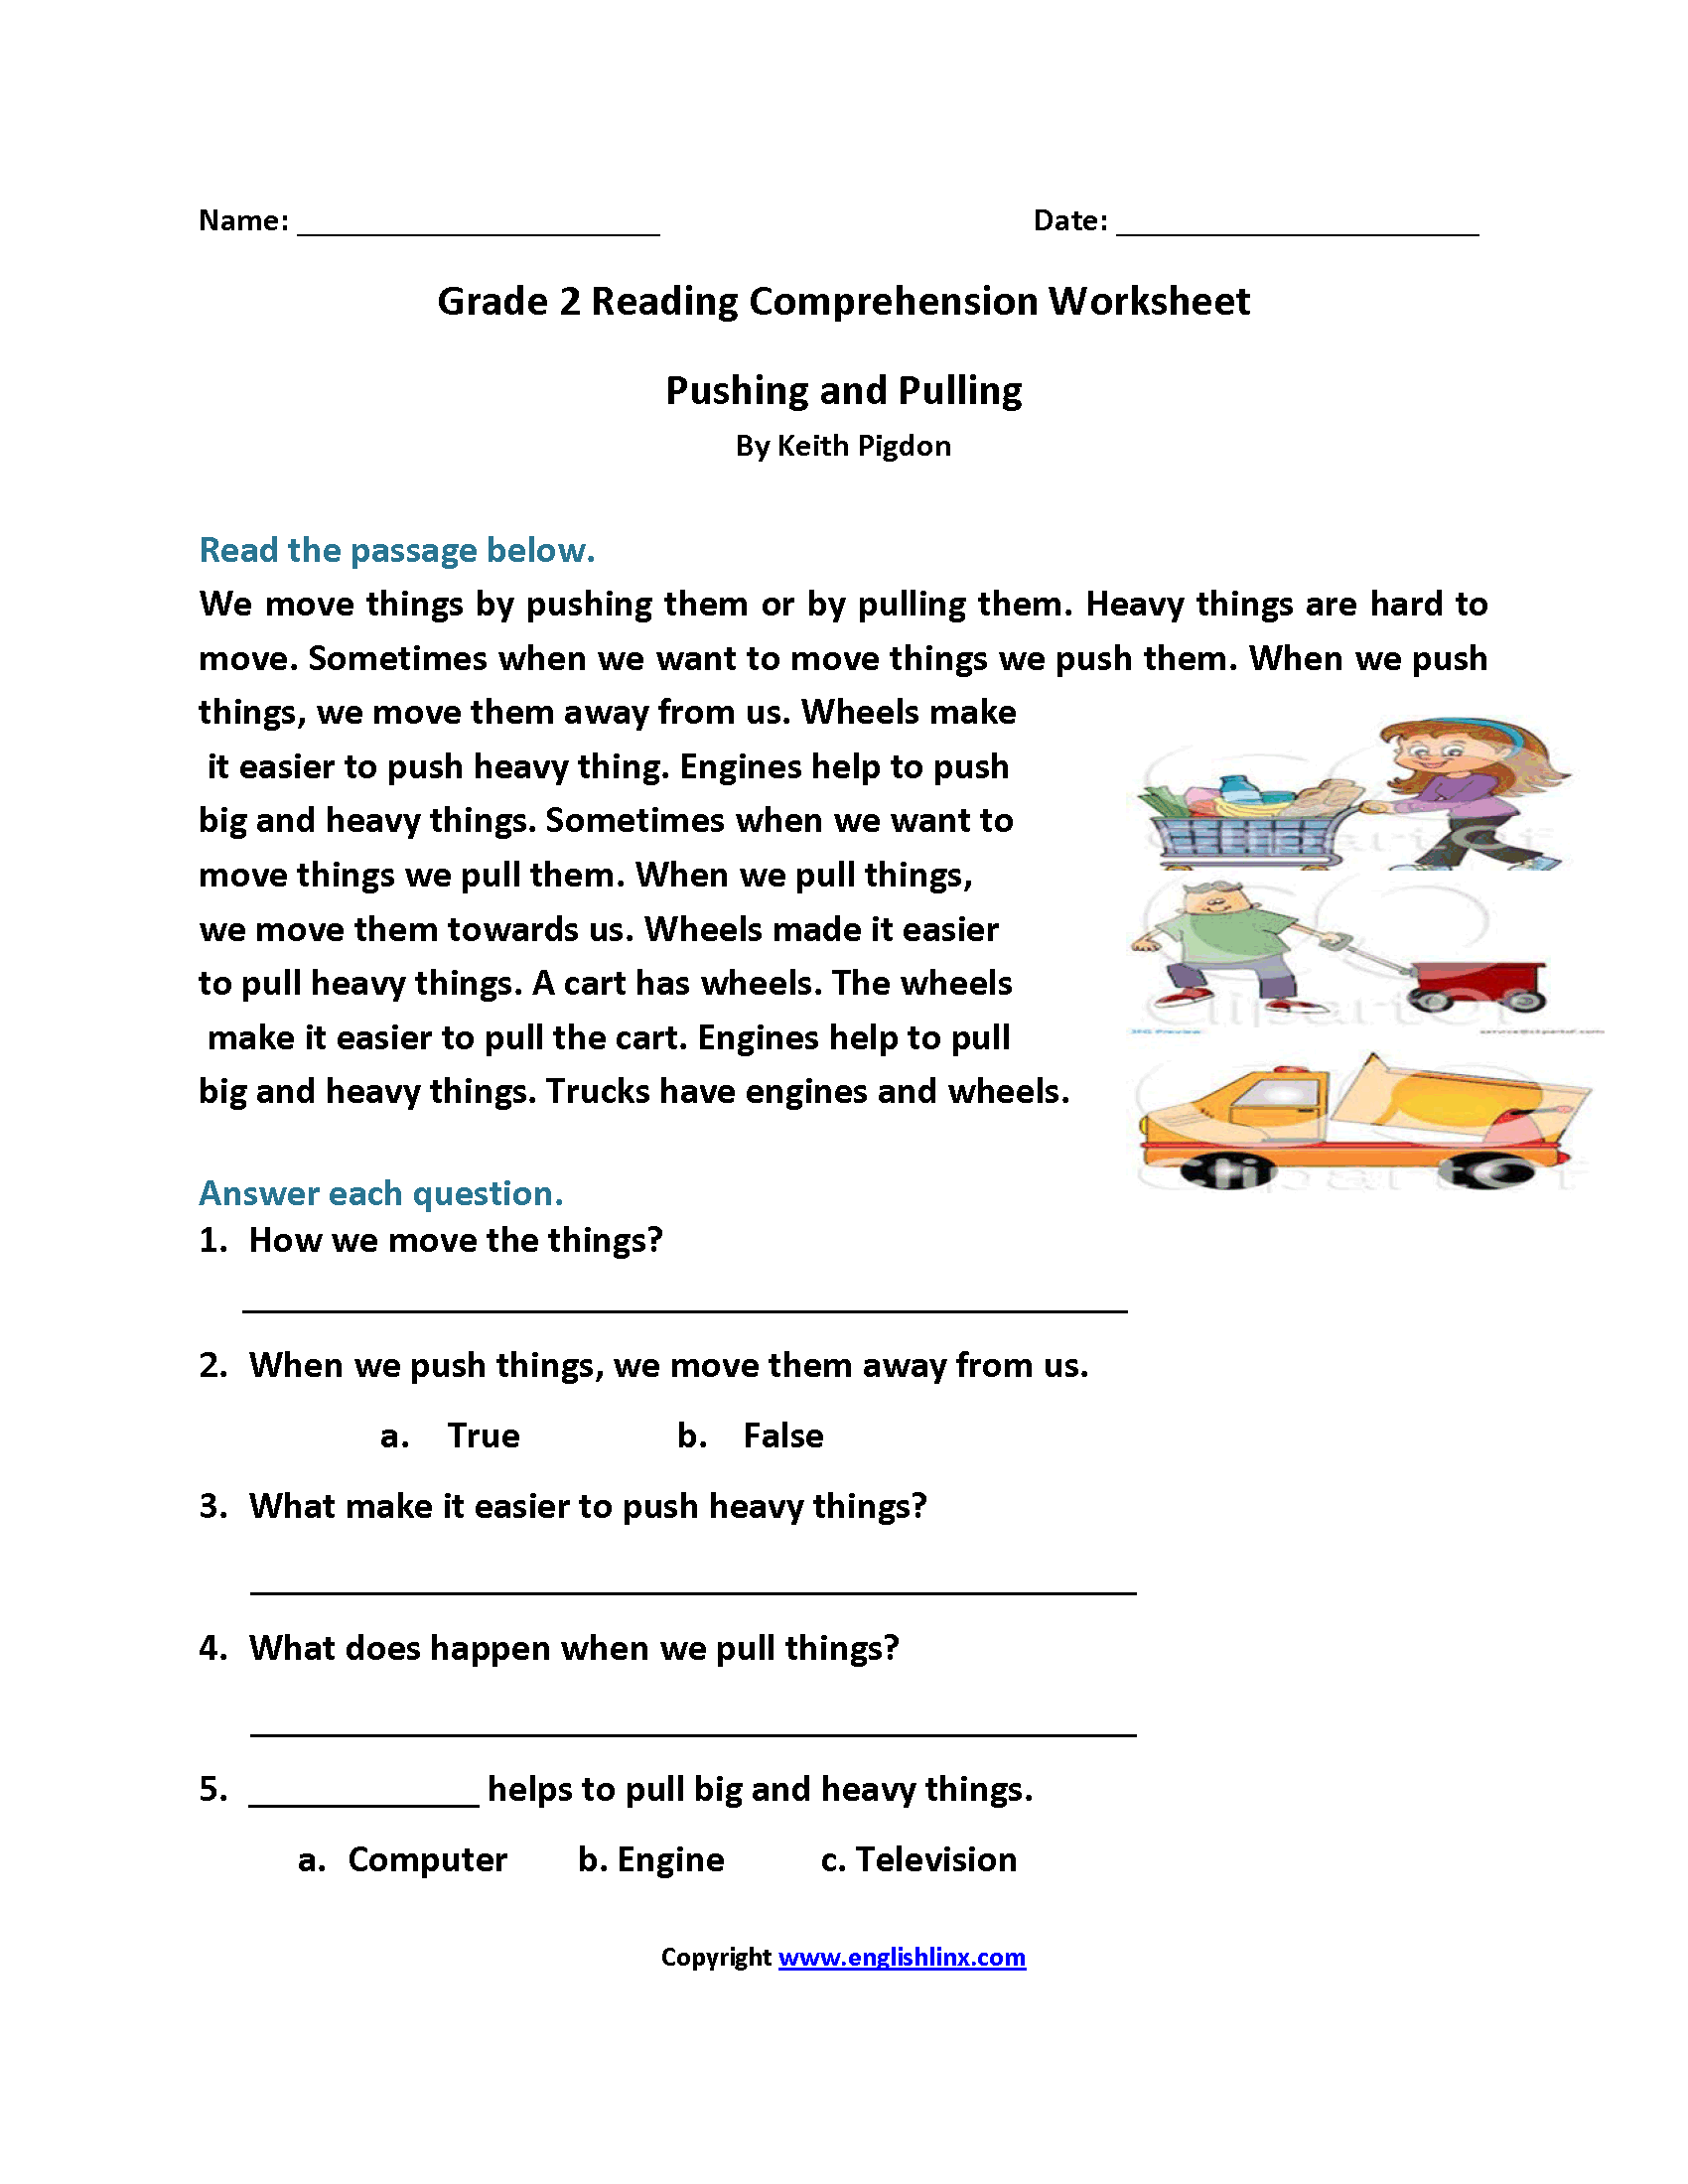 Pushing and Pulling Second Grade Reading Worksheets